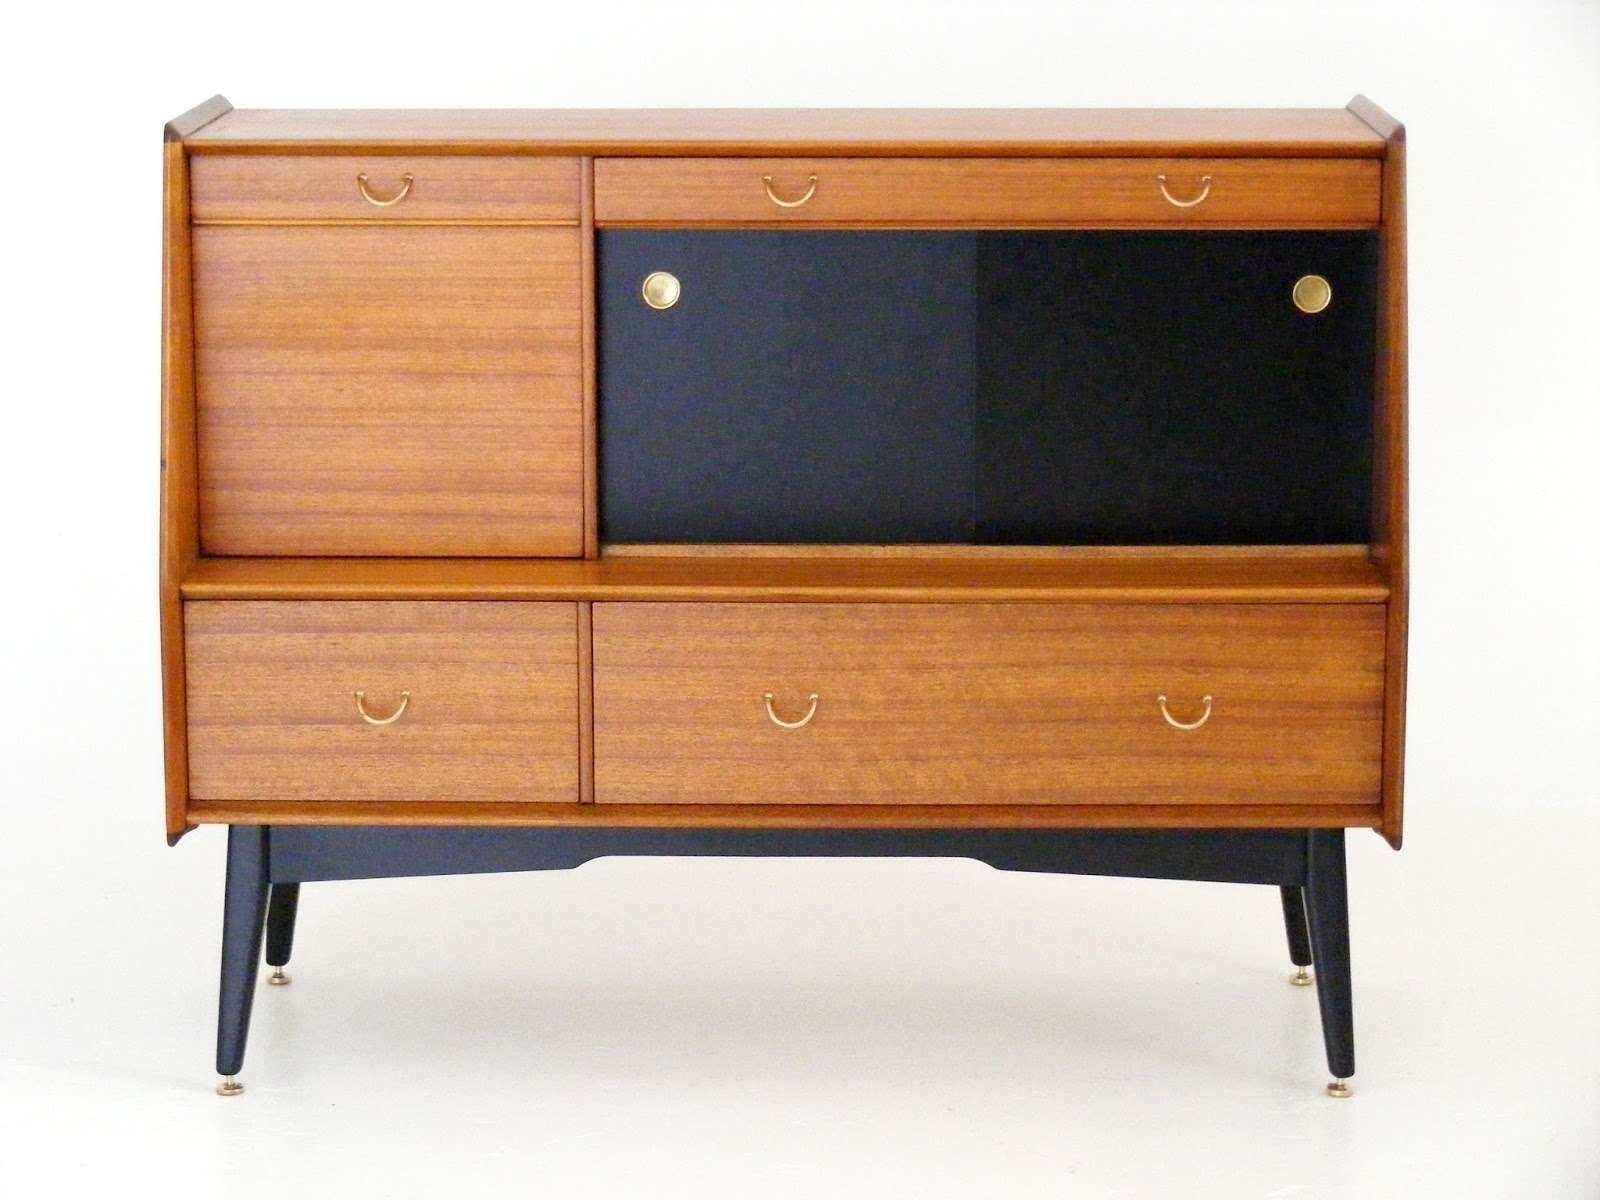 Vamp Furniture: New Vintage Furniture Stock Just Unpacked At Vamp Intended For G Plan Sideboards (View 16 of 20)